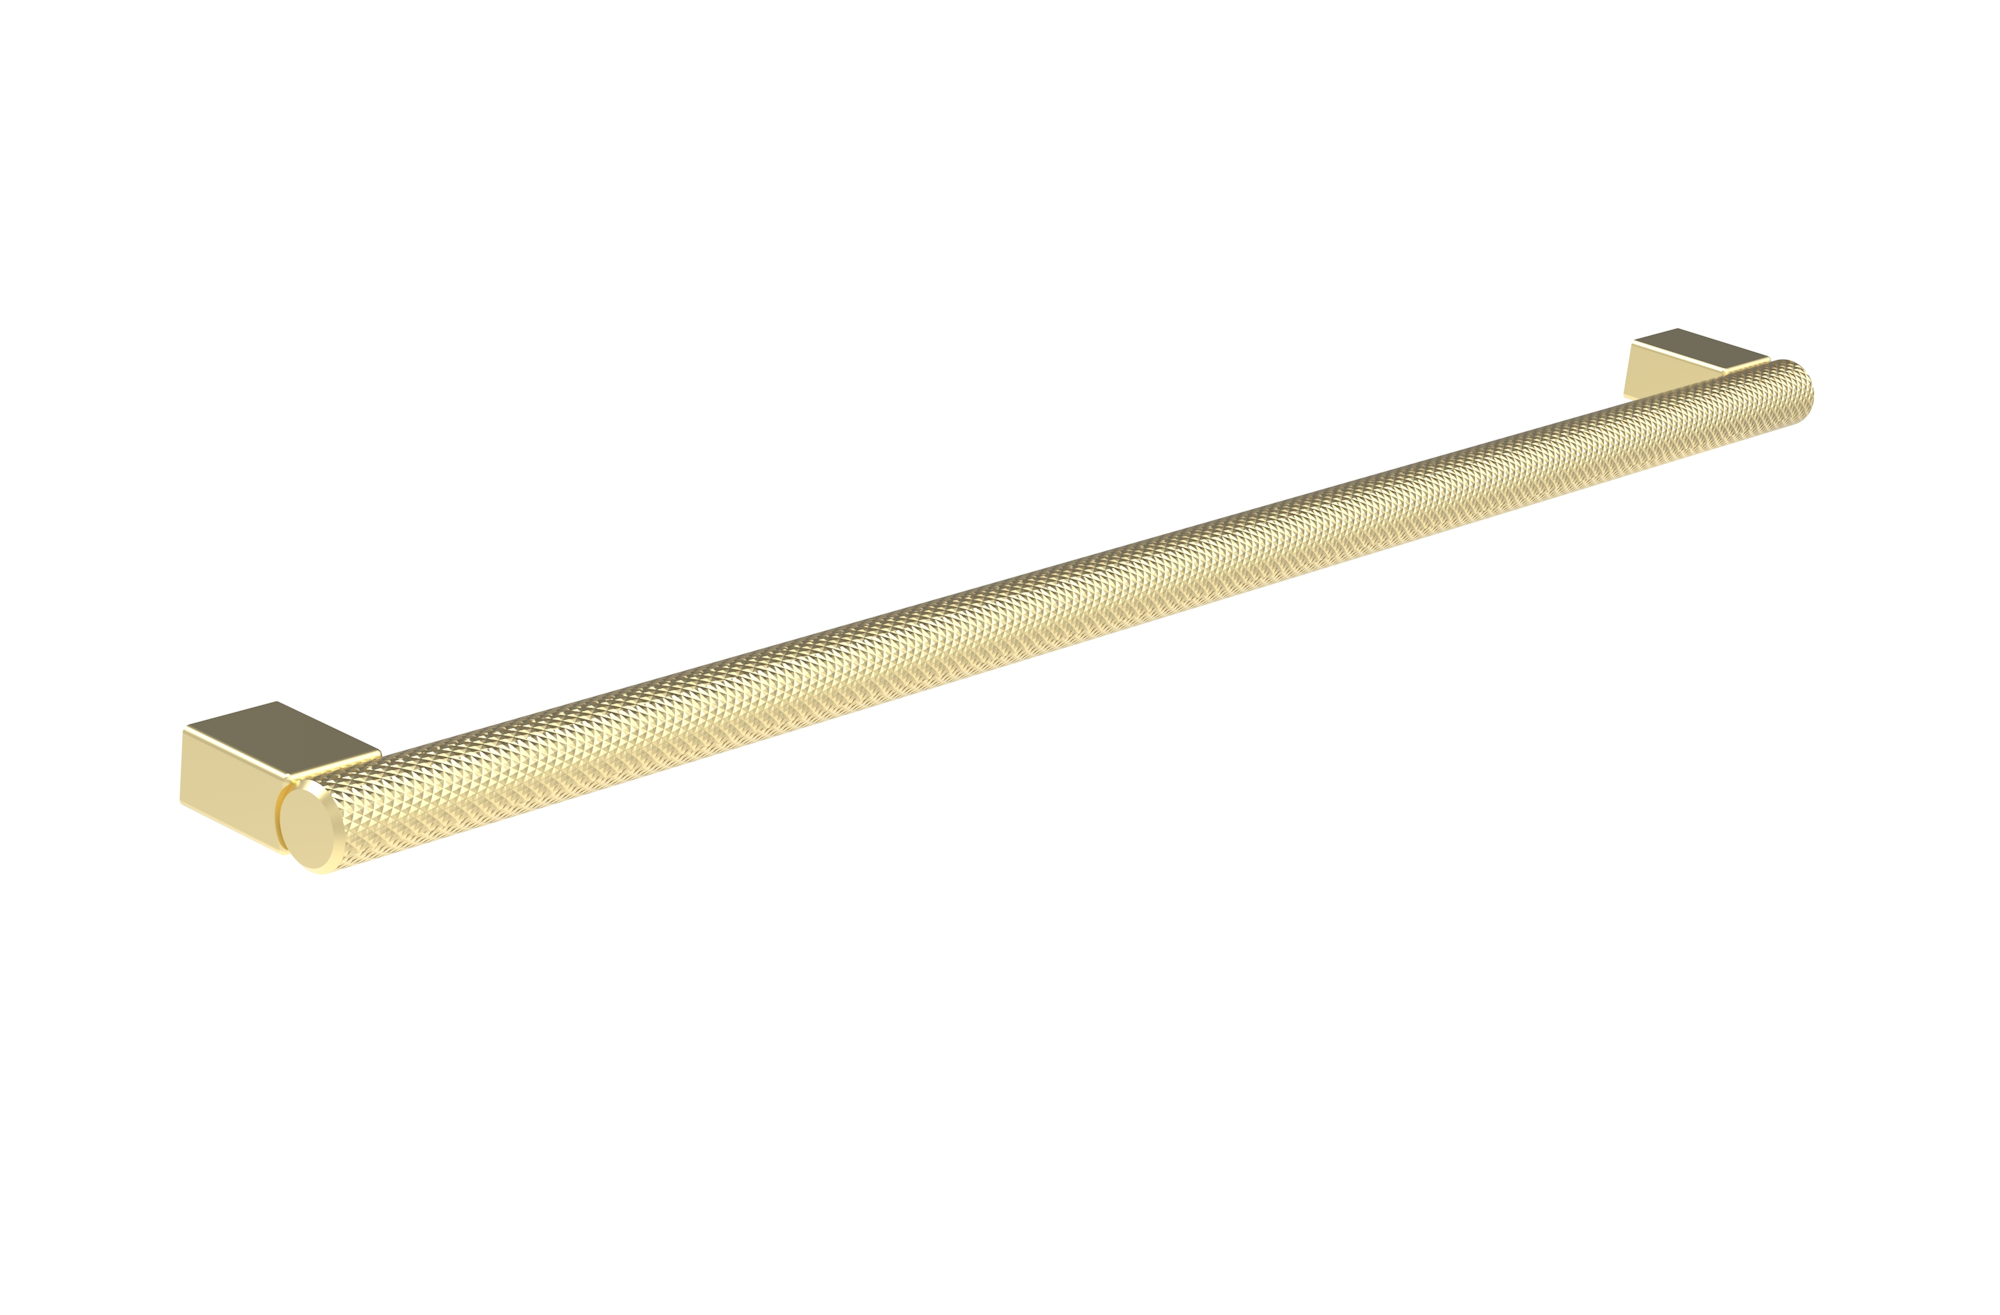 MADRID 346mm knurled handle - Stainless Steel Brushed Brass - 320mm Centres